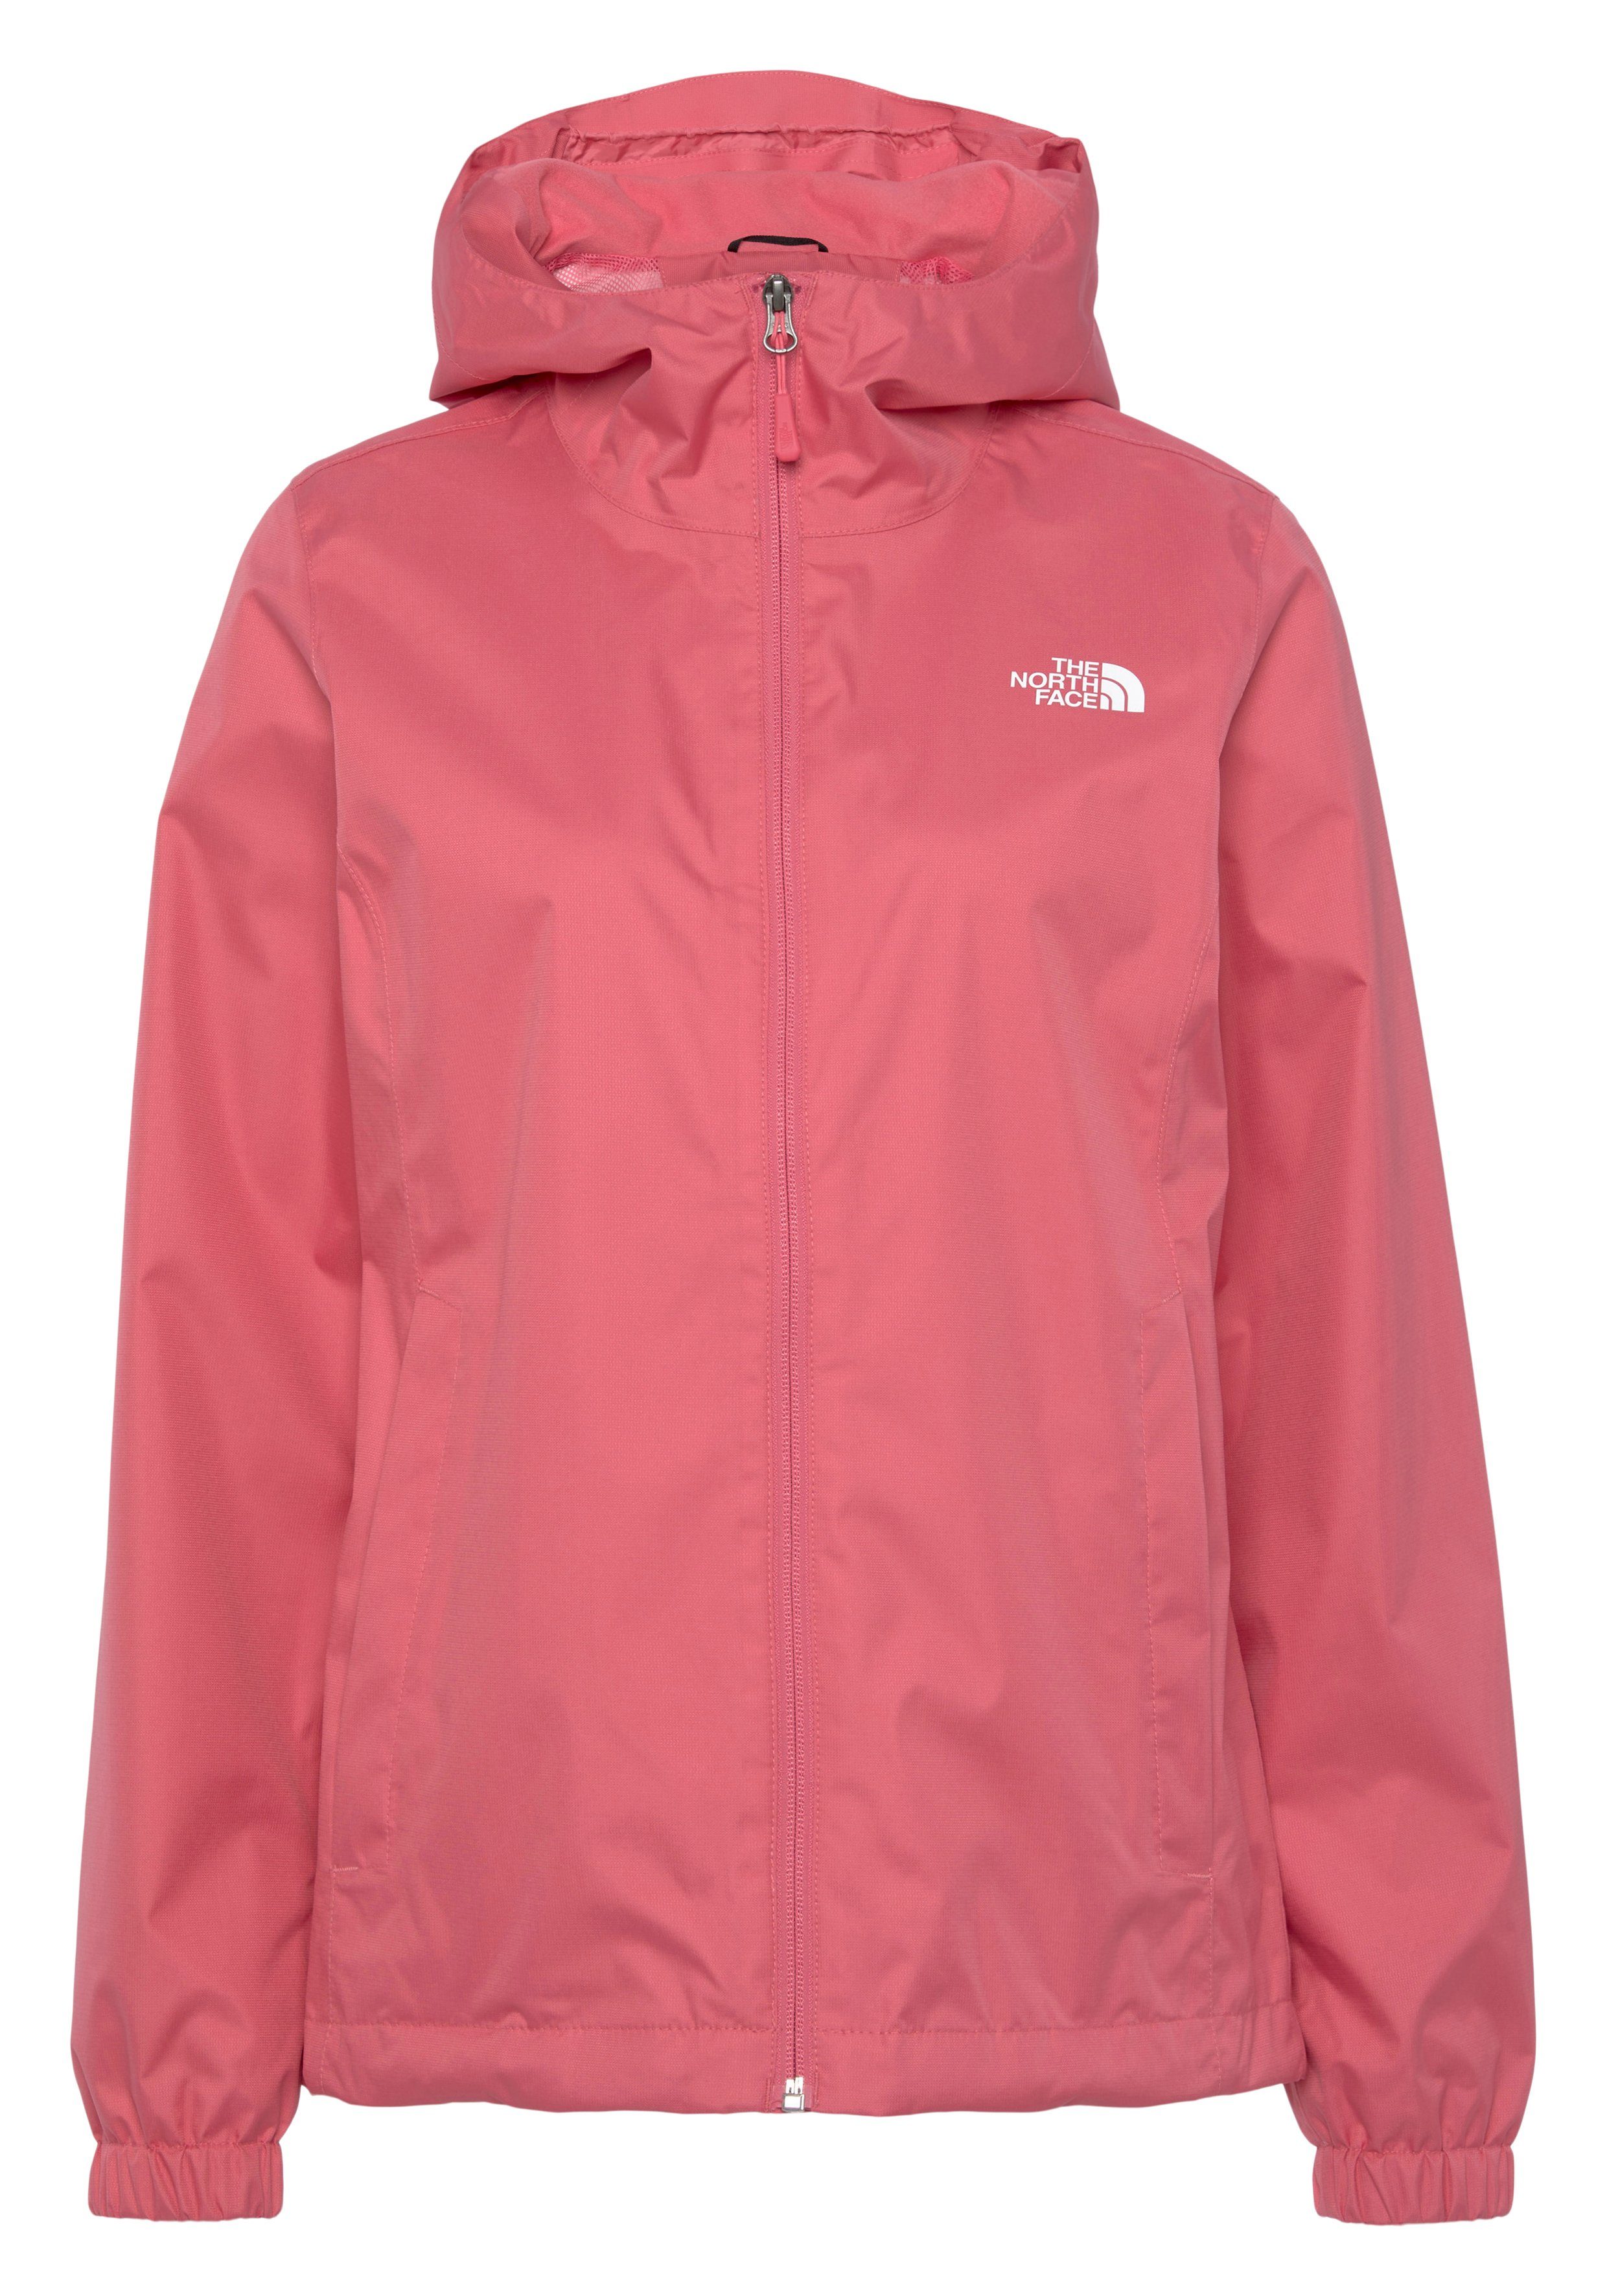 mit W pink Logostickerei Funktionsjacke - cosmo EU (1-St) Face QUEST North JACKET The